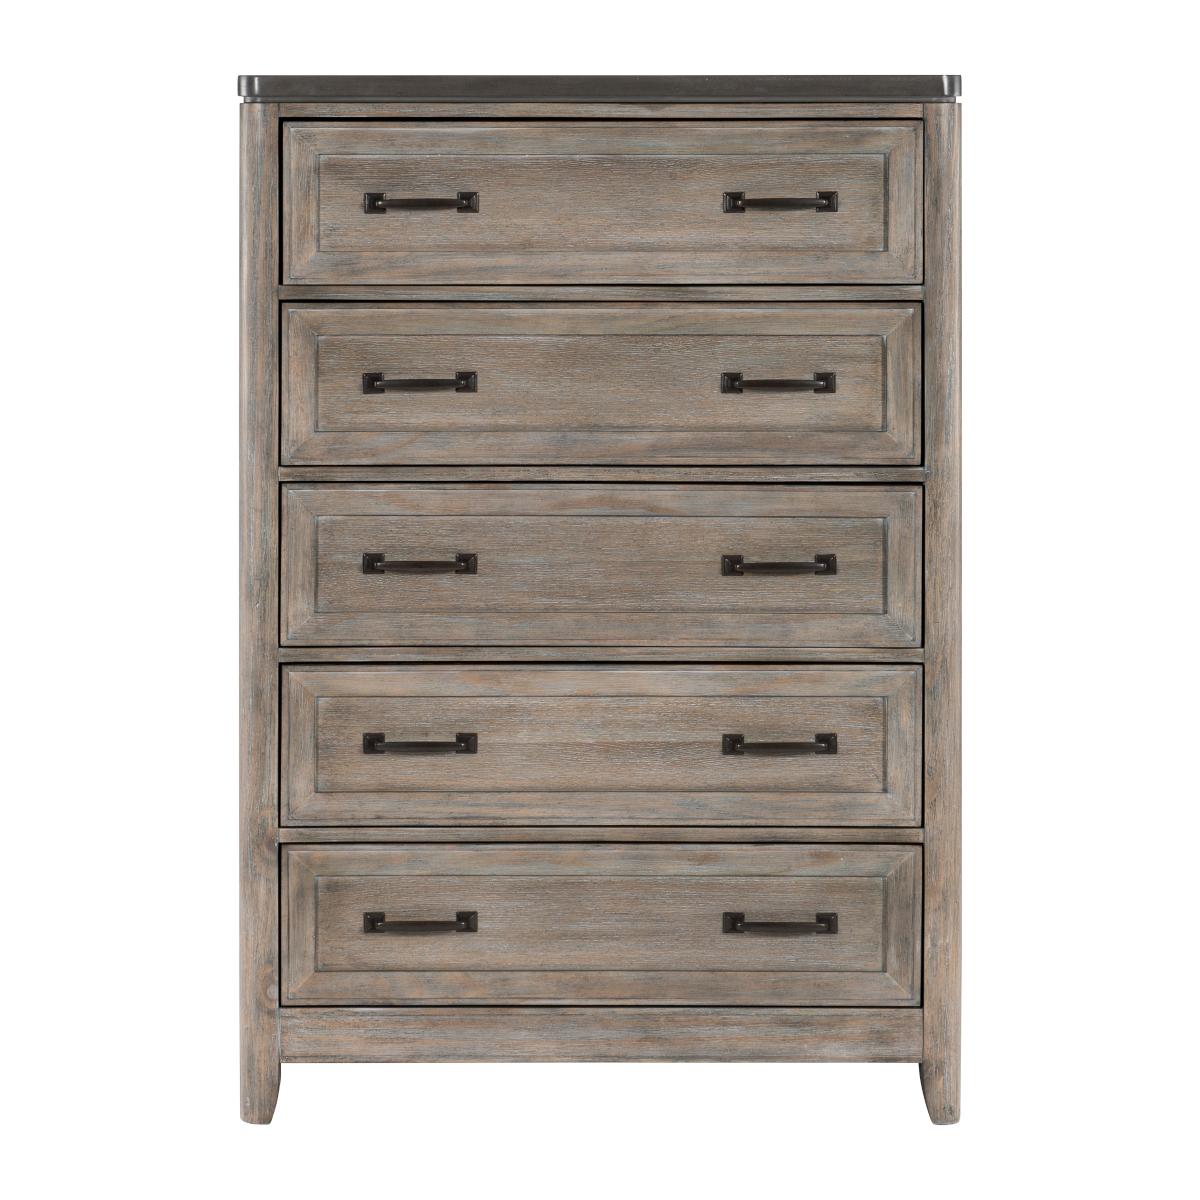 Transitional Chest 1412-9 Newell 1412-9 in Oak 